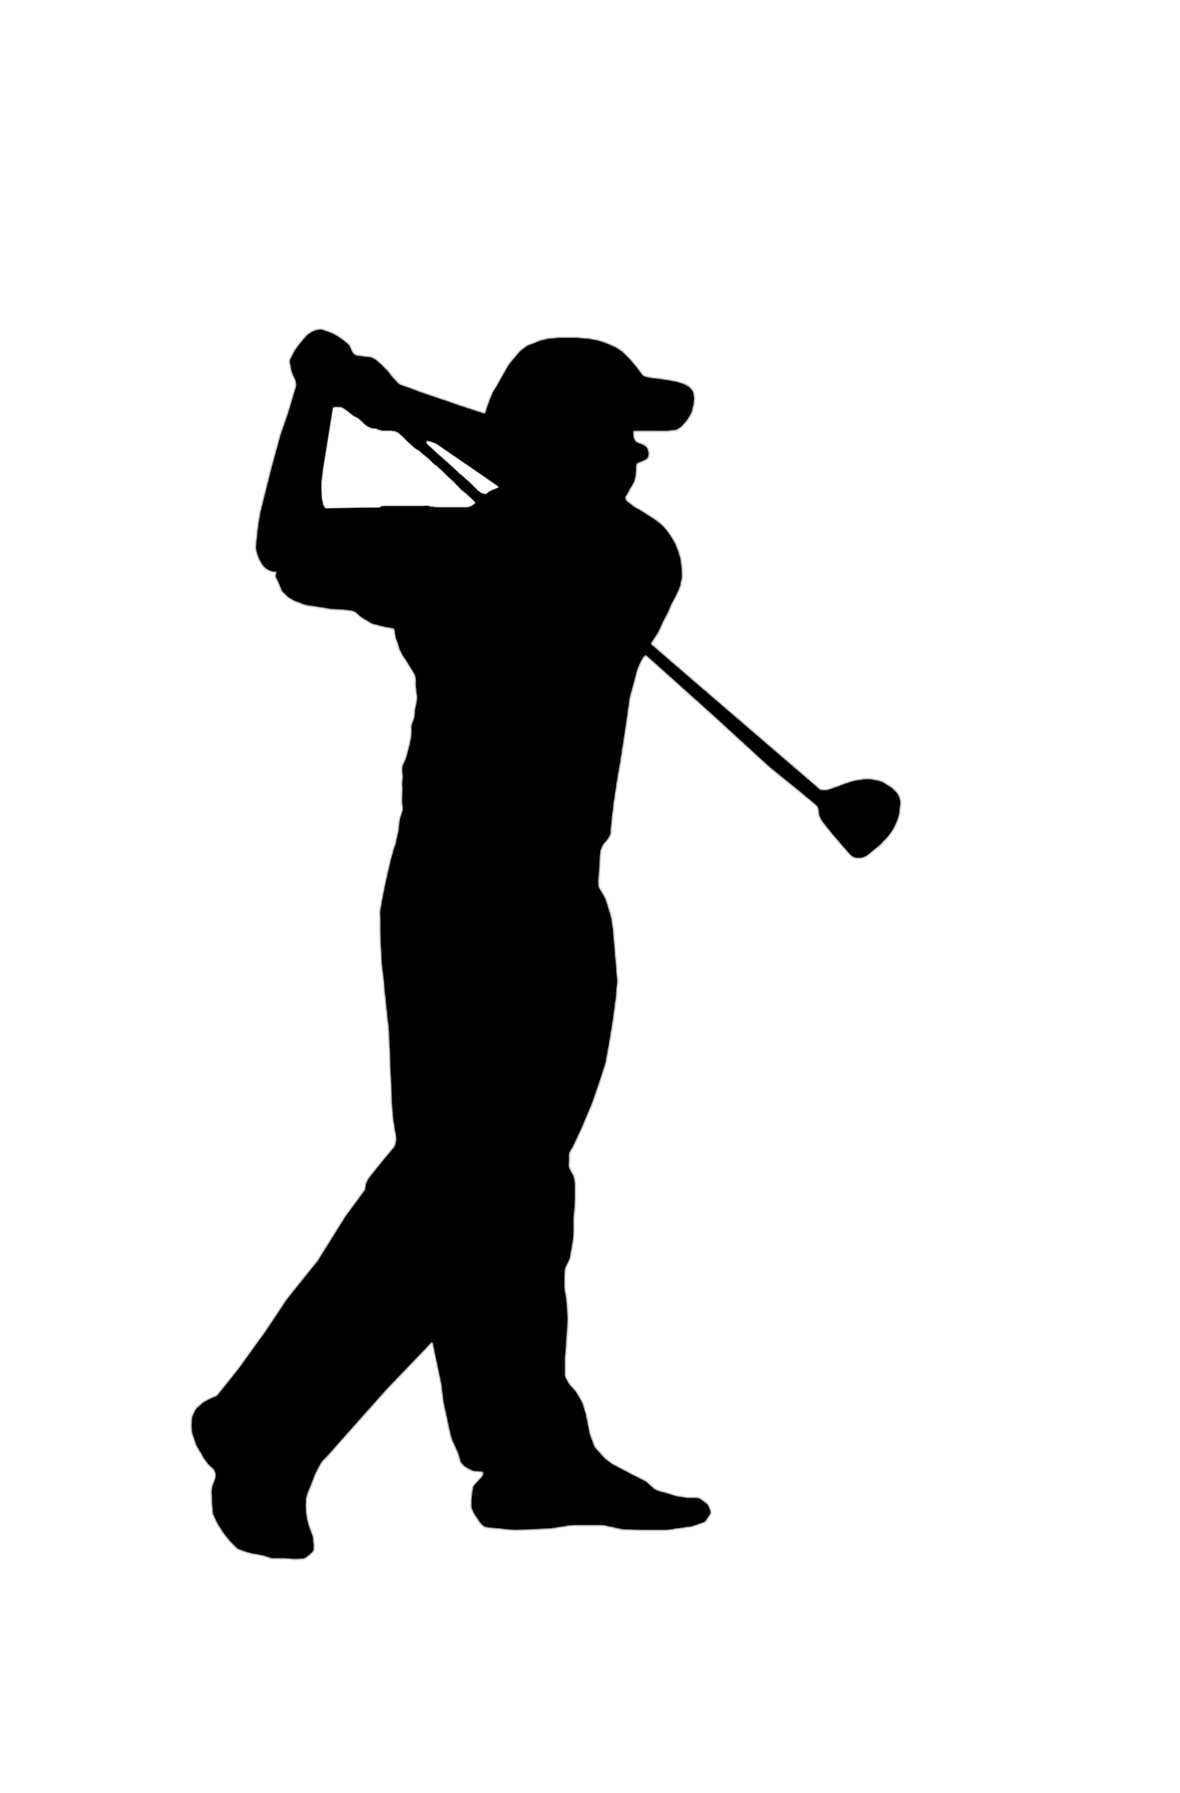 Free cliparts download clip. Golf clipart silhouette